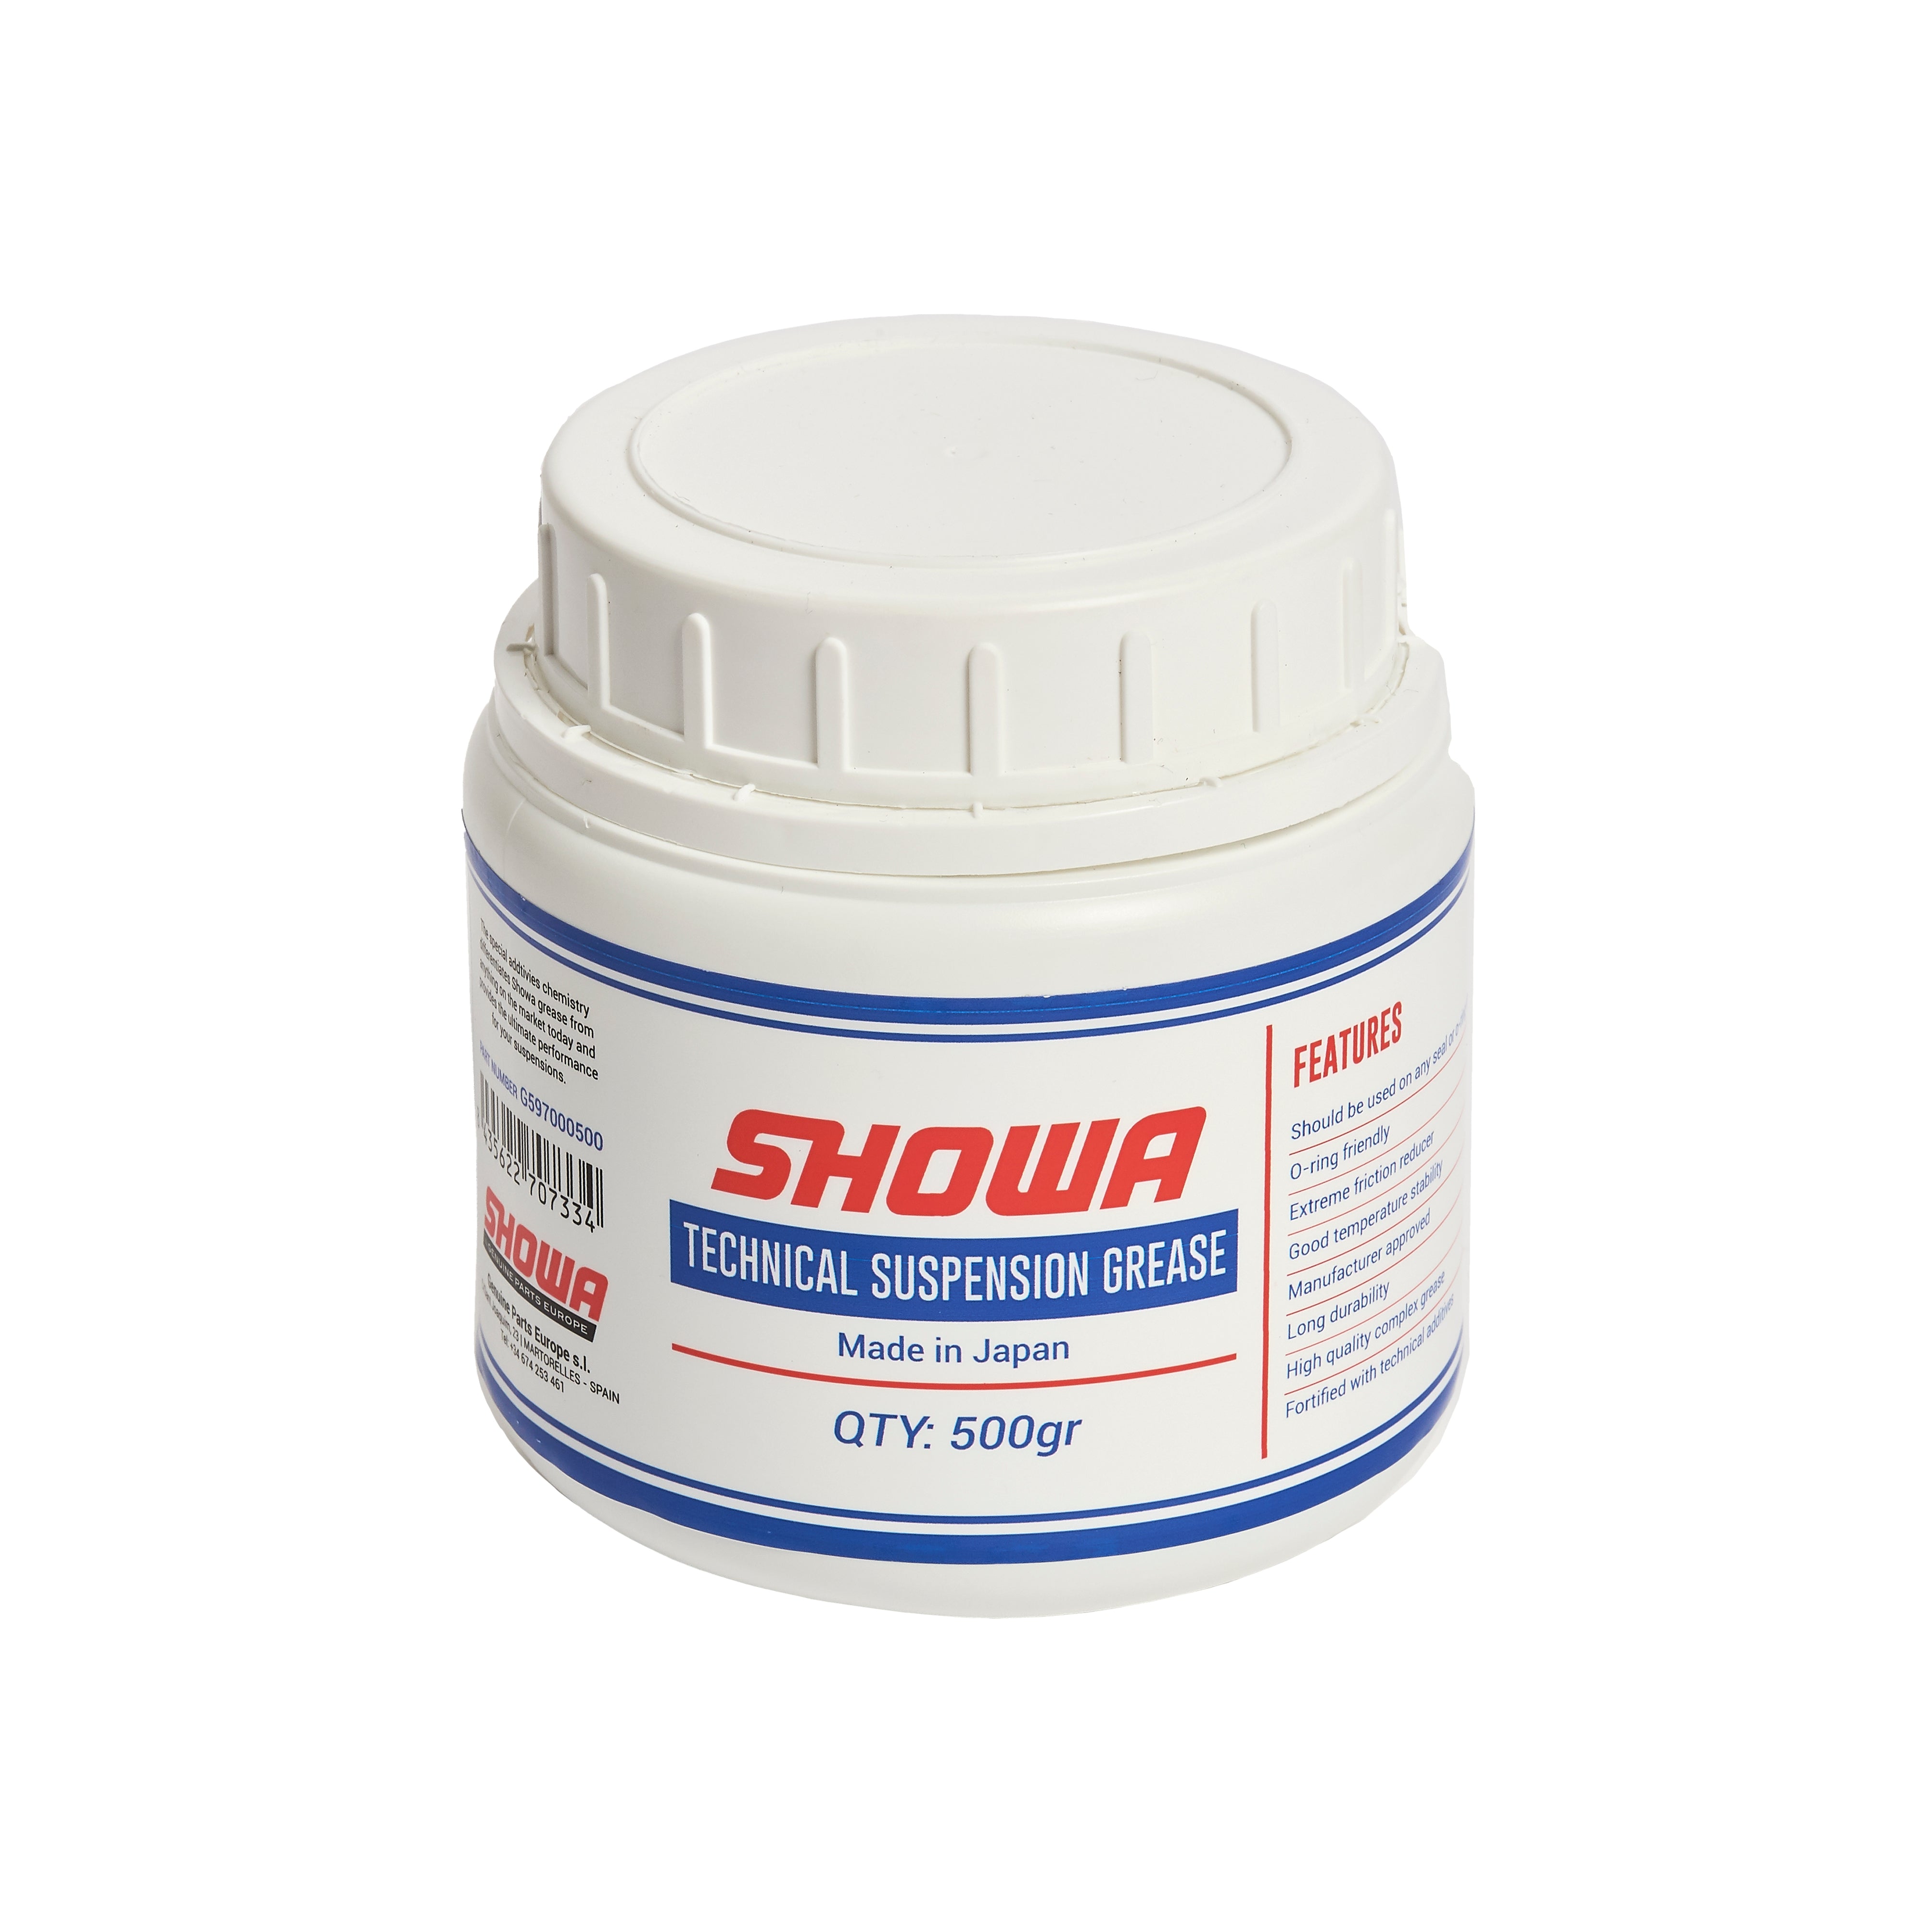 SHOWA Technical Suspension Grease 500gr